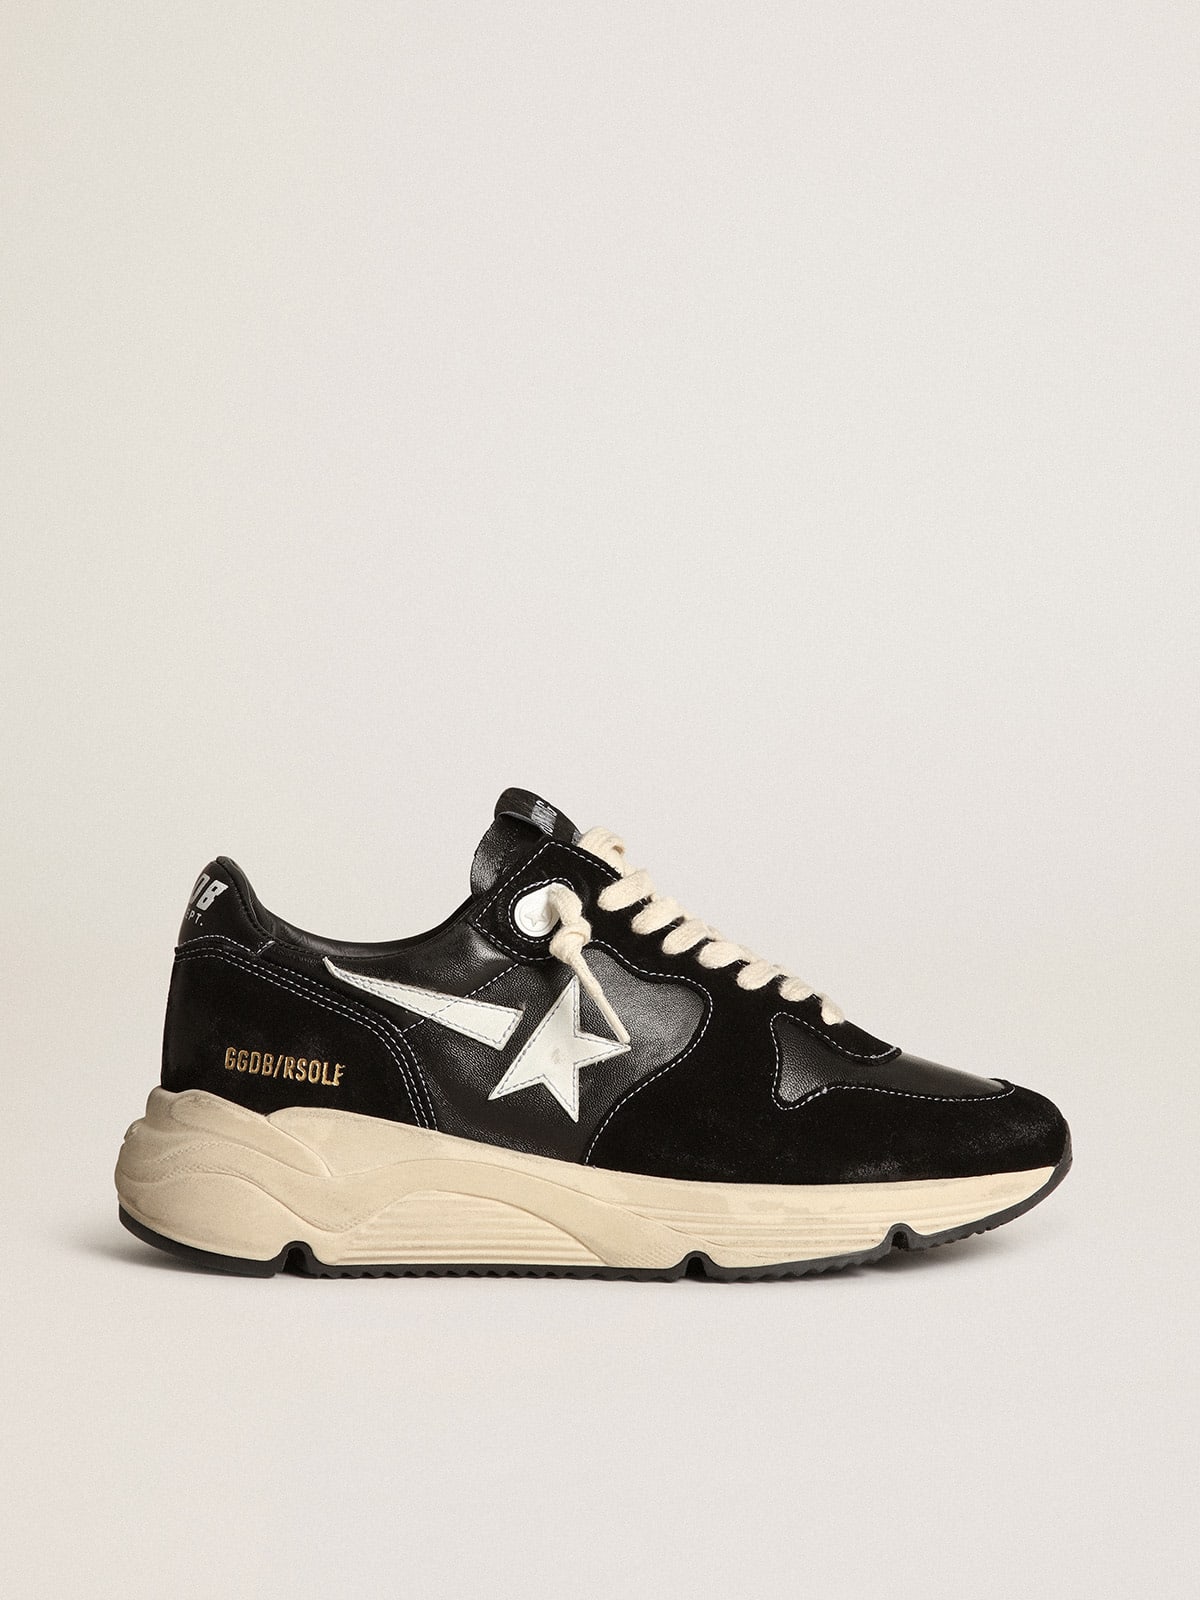 Men's Running Sole in black nappa leather and suede with a white star